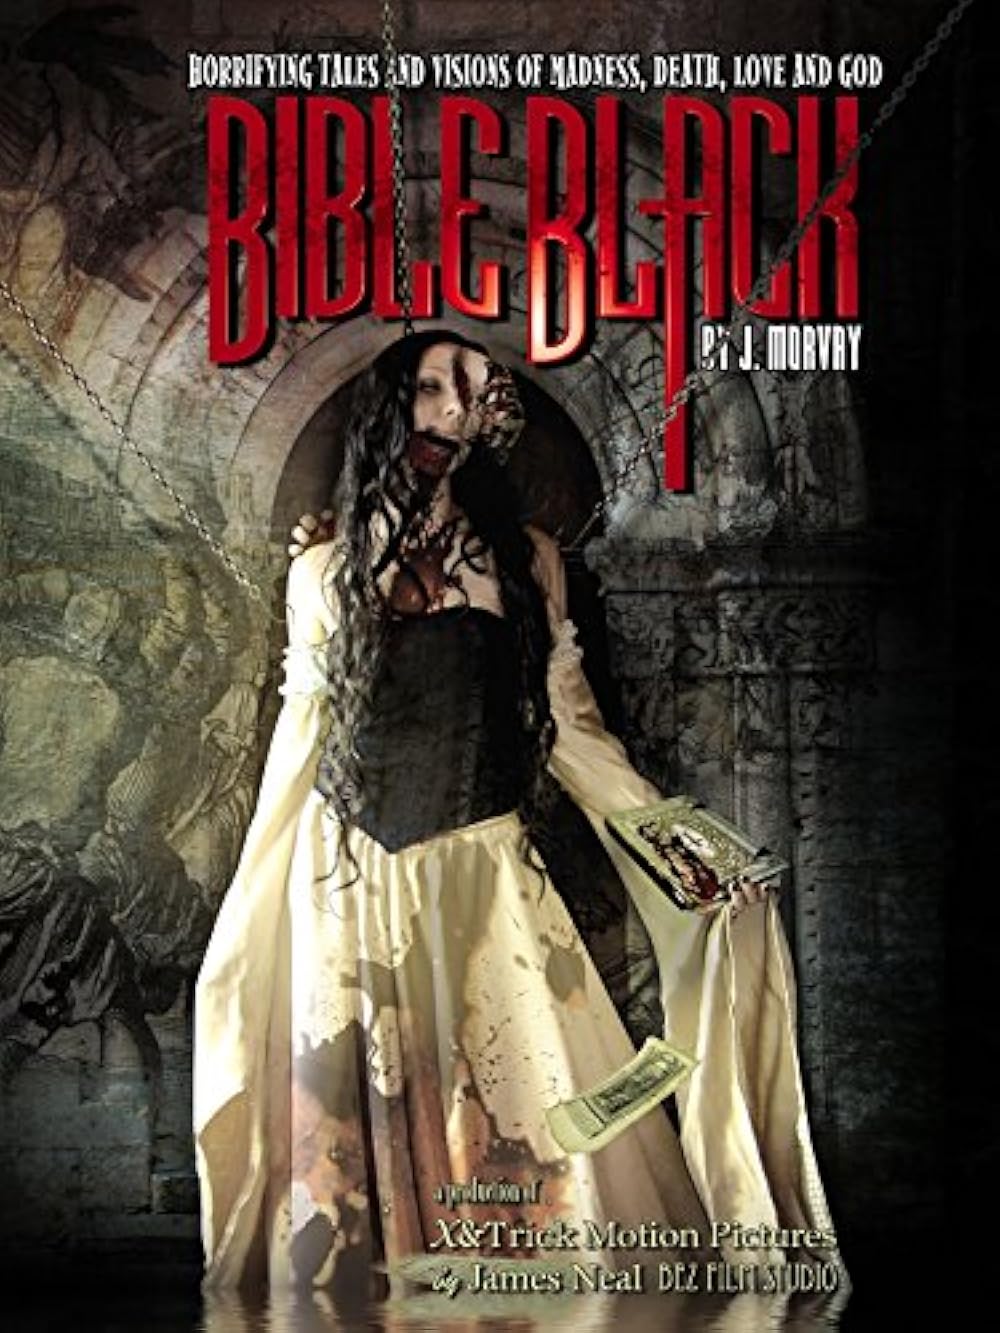 capers recommends bible black full movie pic